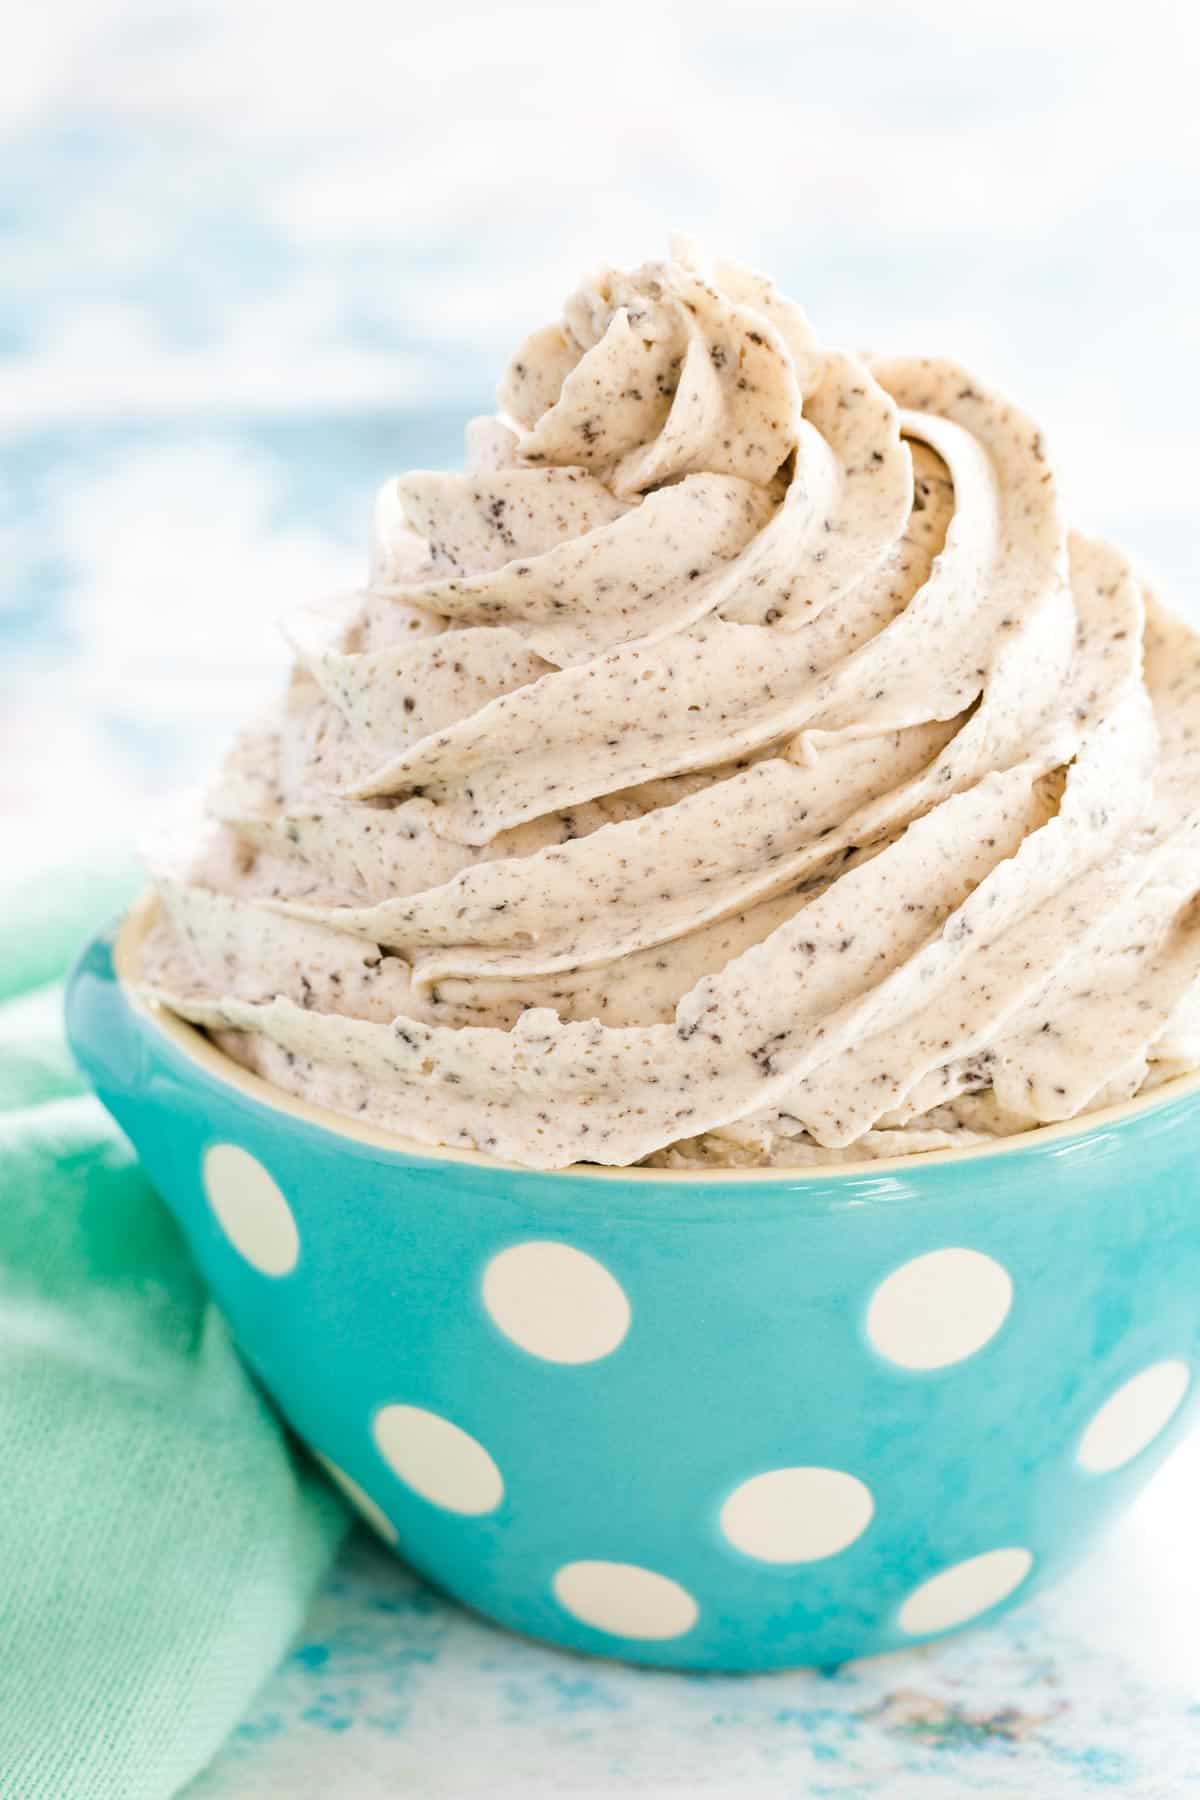 A swirl of oreo frosting in a blue and white polka dot bowl.